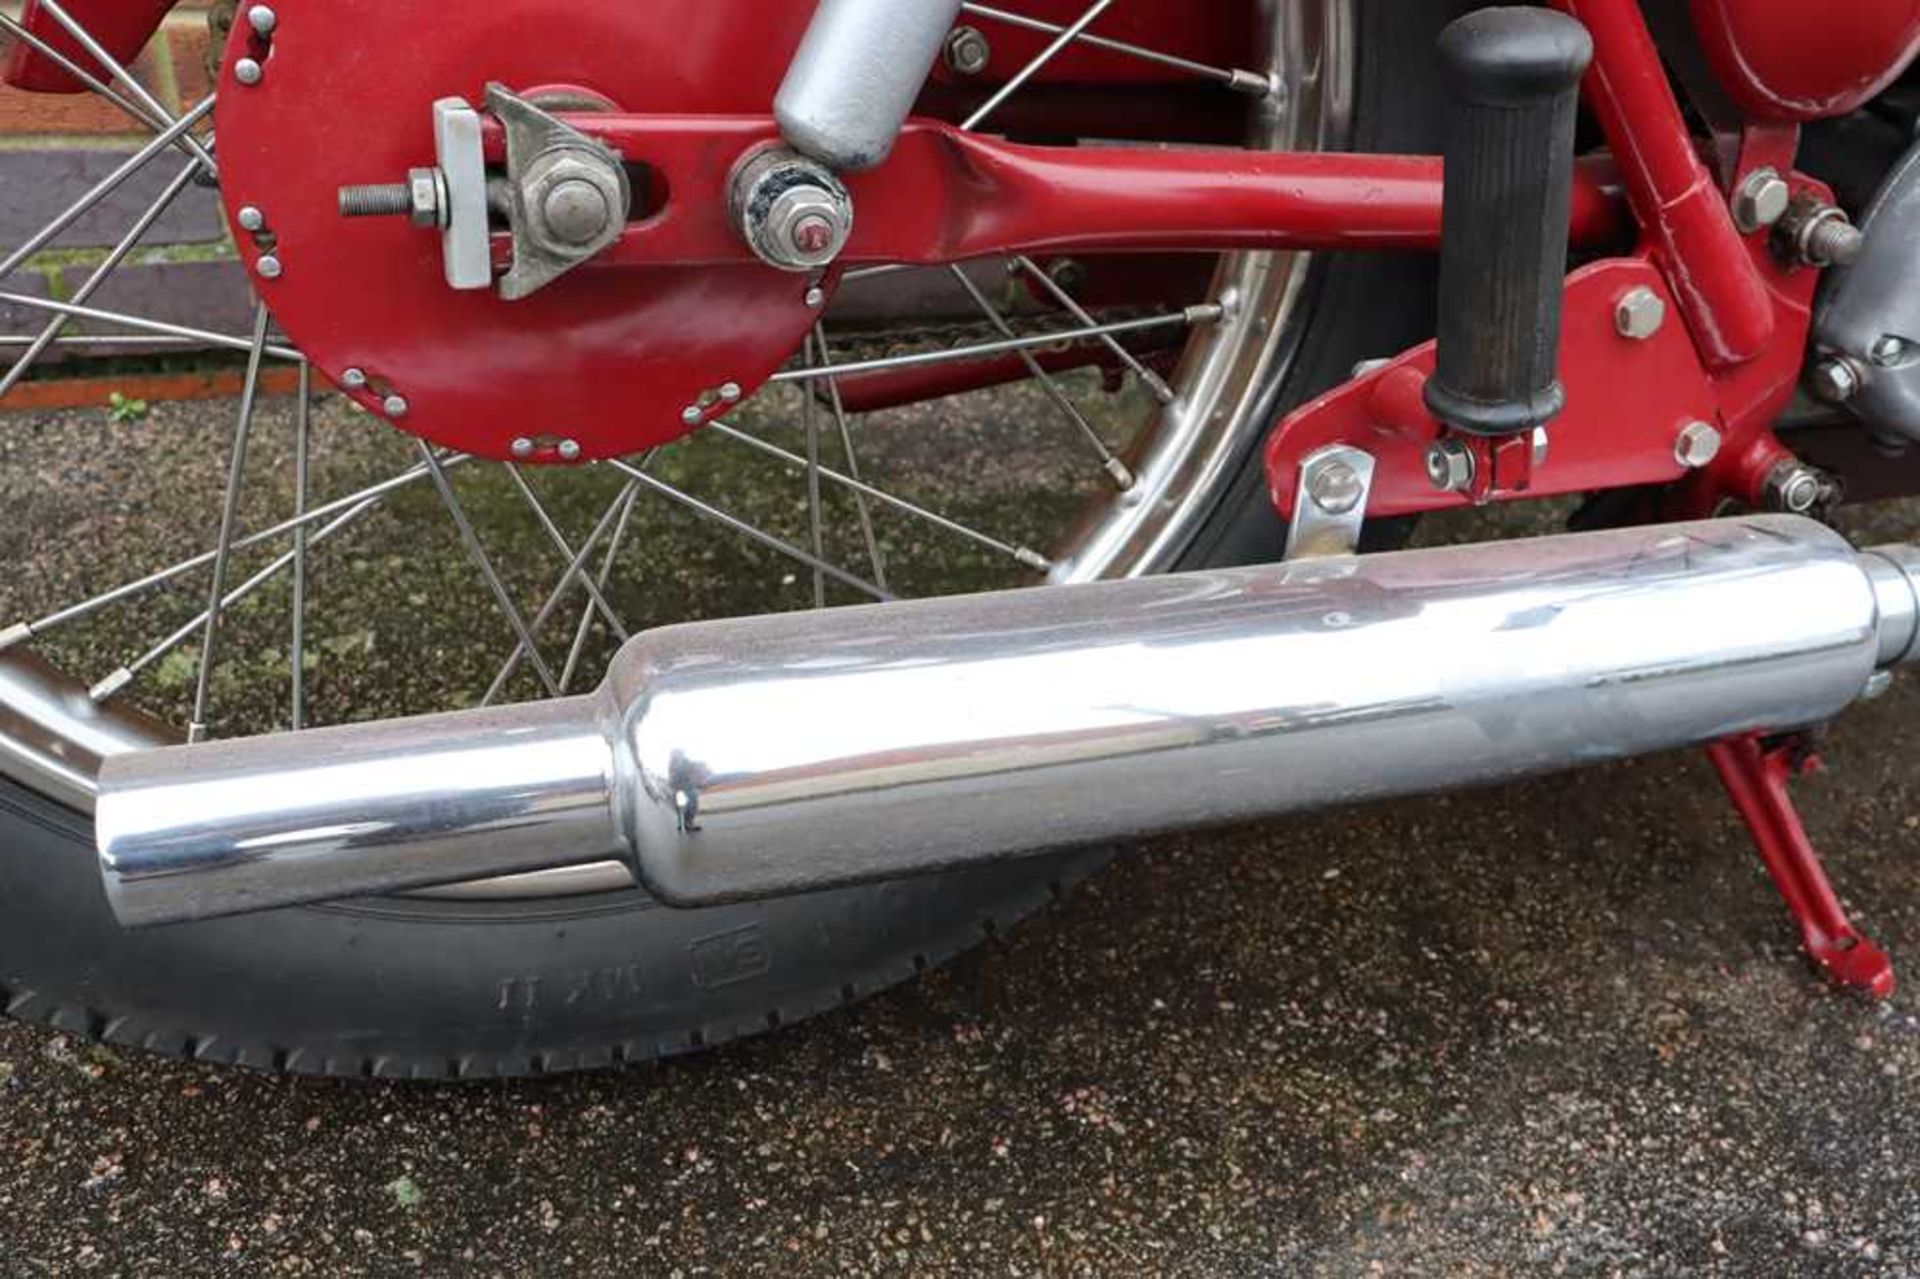 1956 BSA C12 Stainless steel rims and spokes - Image 32 of 44